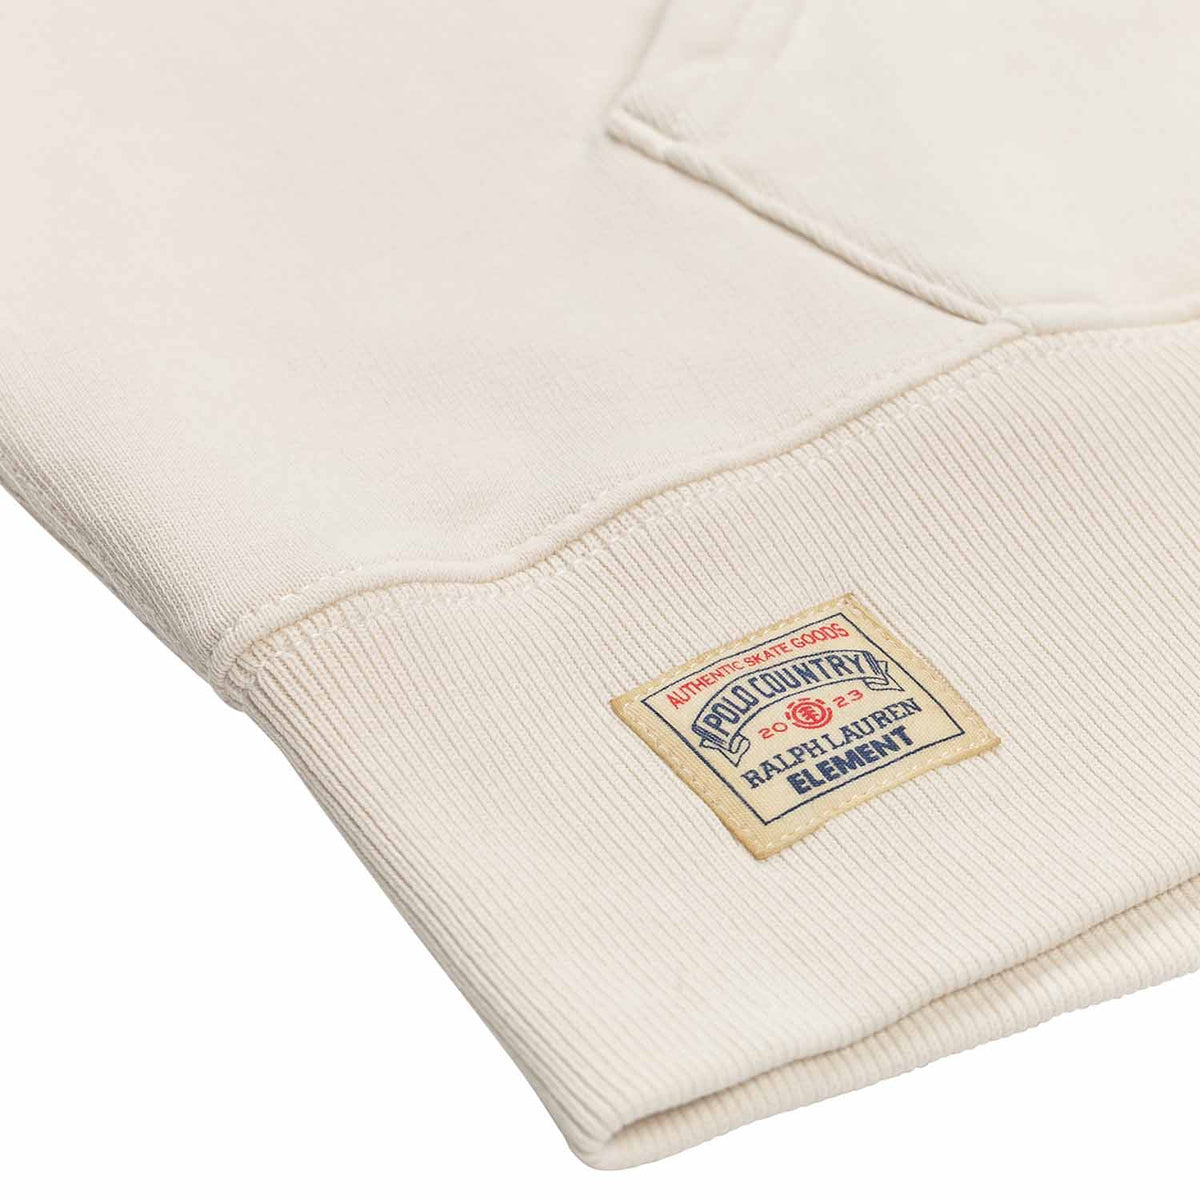 Polo Ralph Lauren x Element Skateboards Hoodie in cream white color. Detail shot of Small sewn on square logo at bottom left of hoodie on waist band. Light brown patch with red and blue writing.